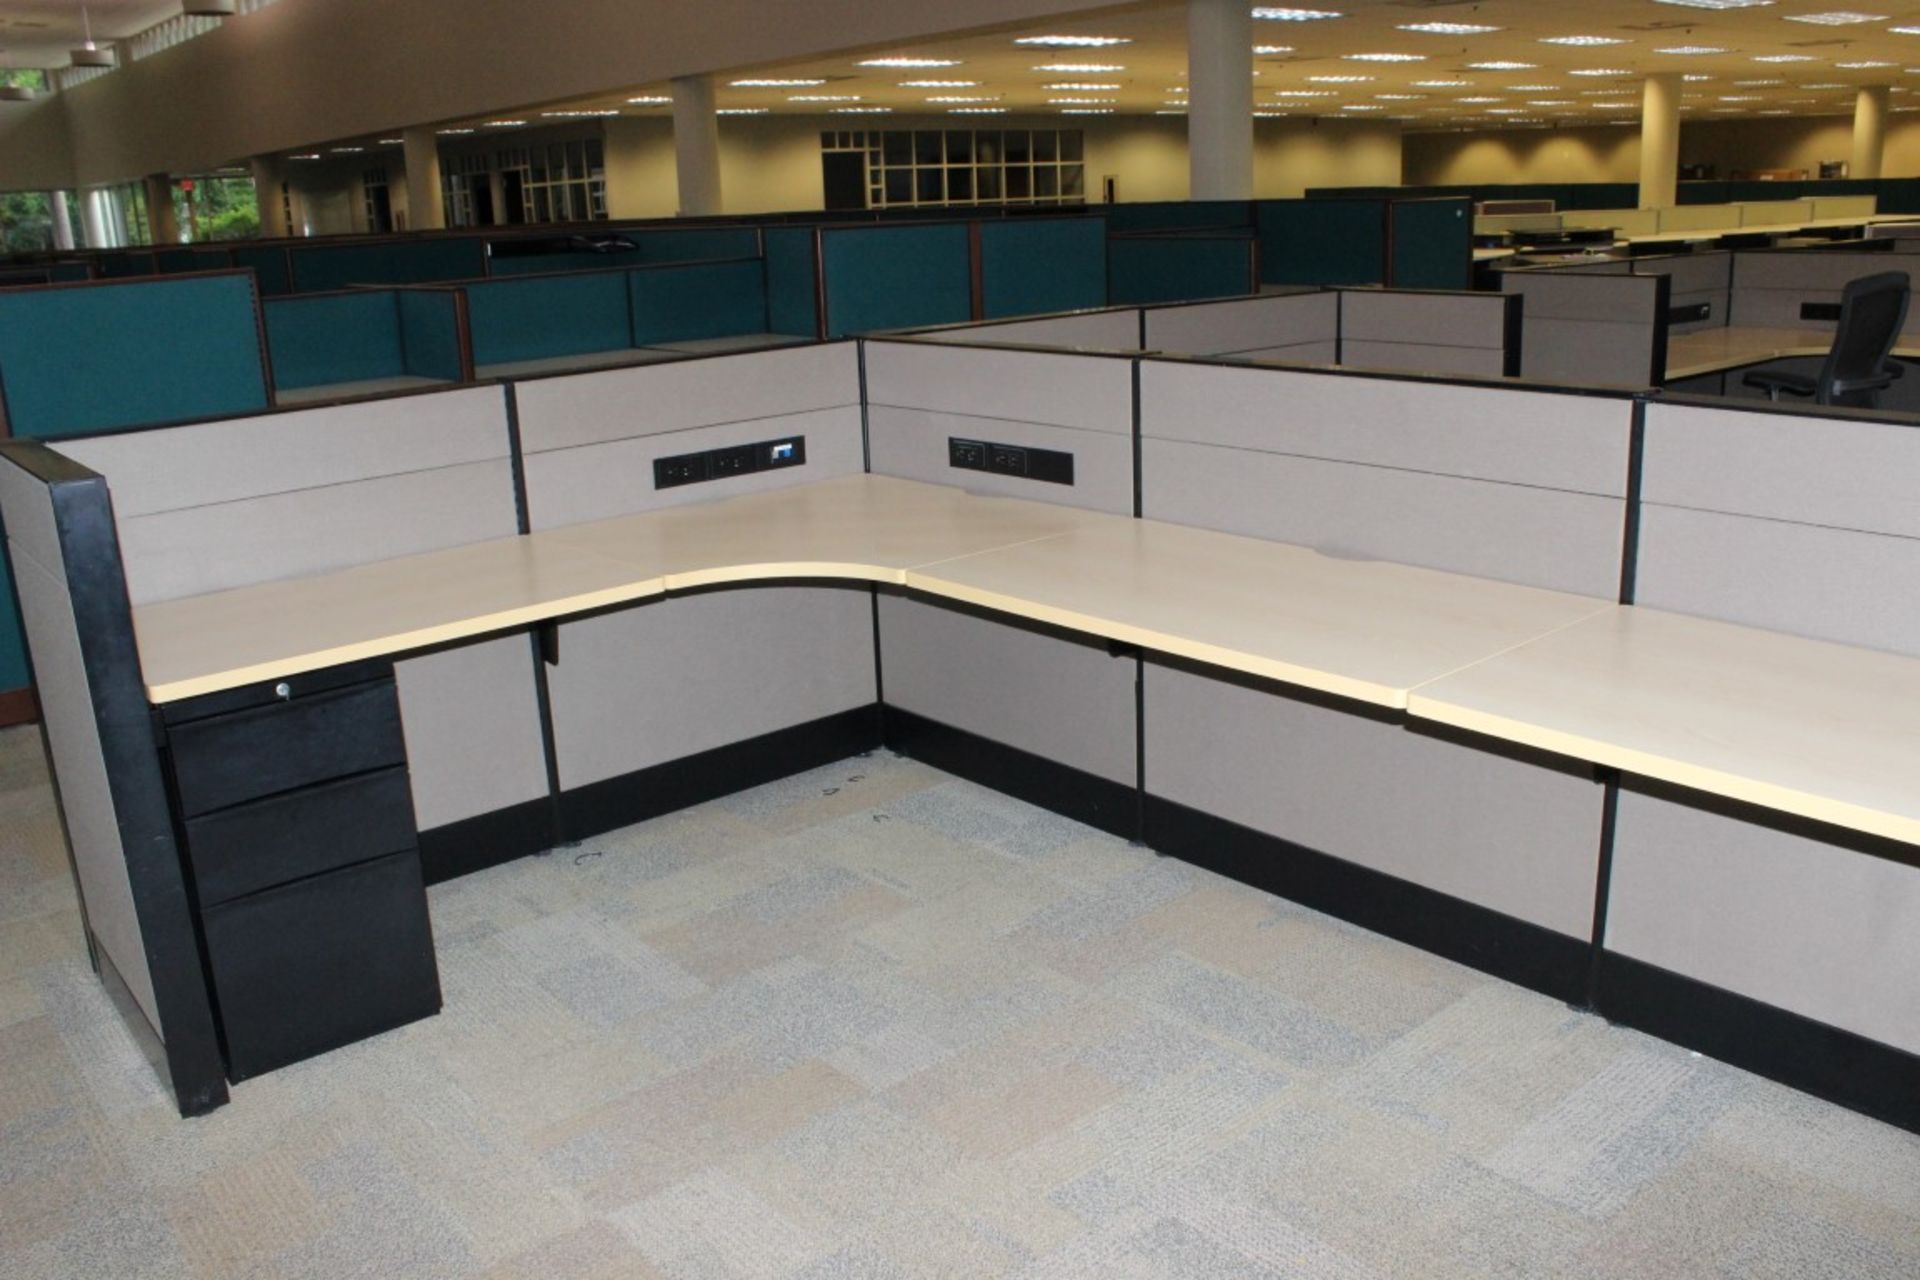 EXECUTIVE OFFICE CUBICLES. DISMANTLED & READY TO LOAD - Image 6 of 7